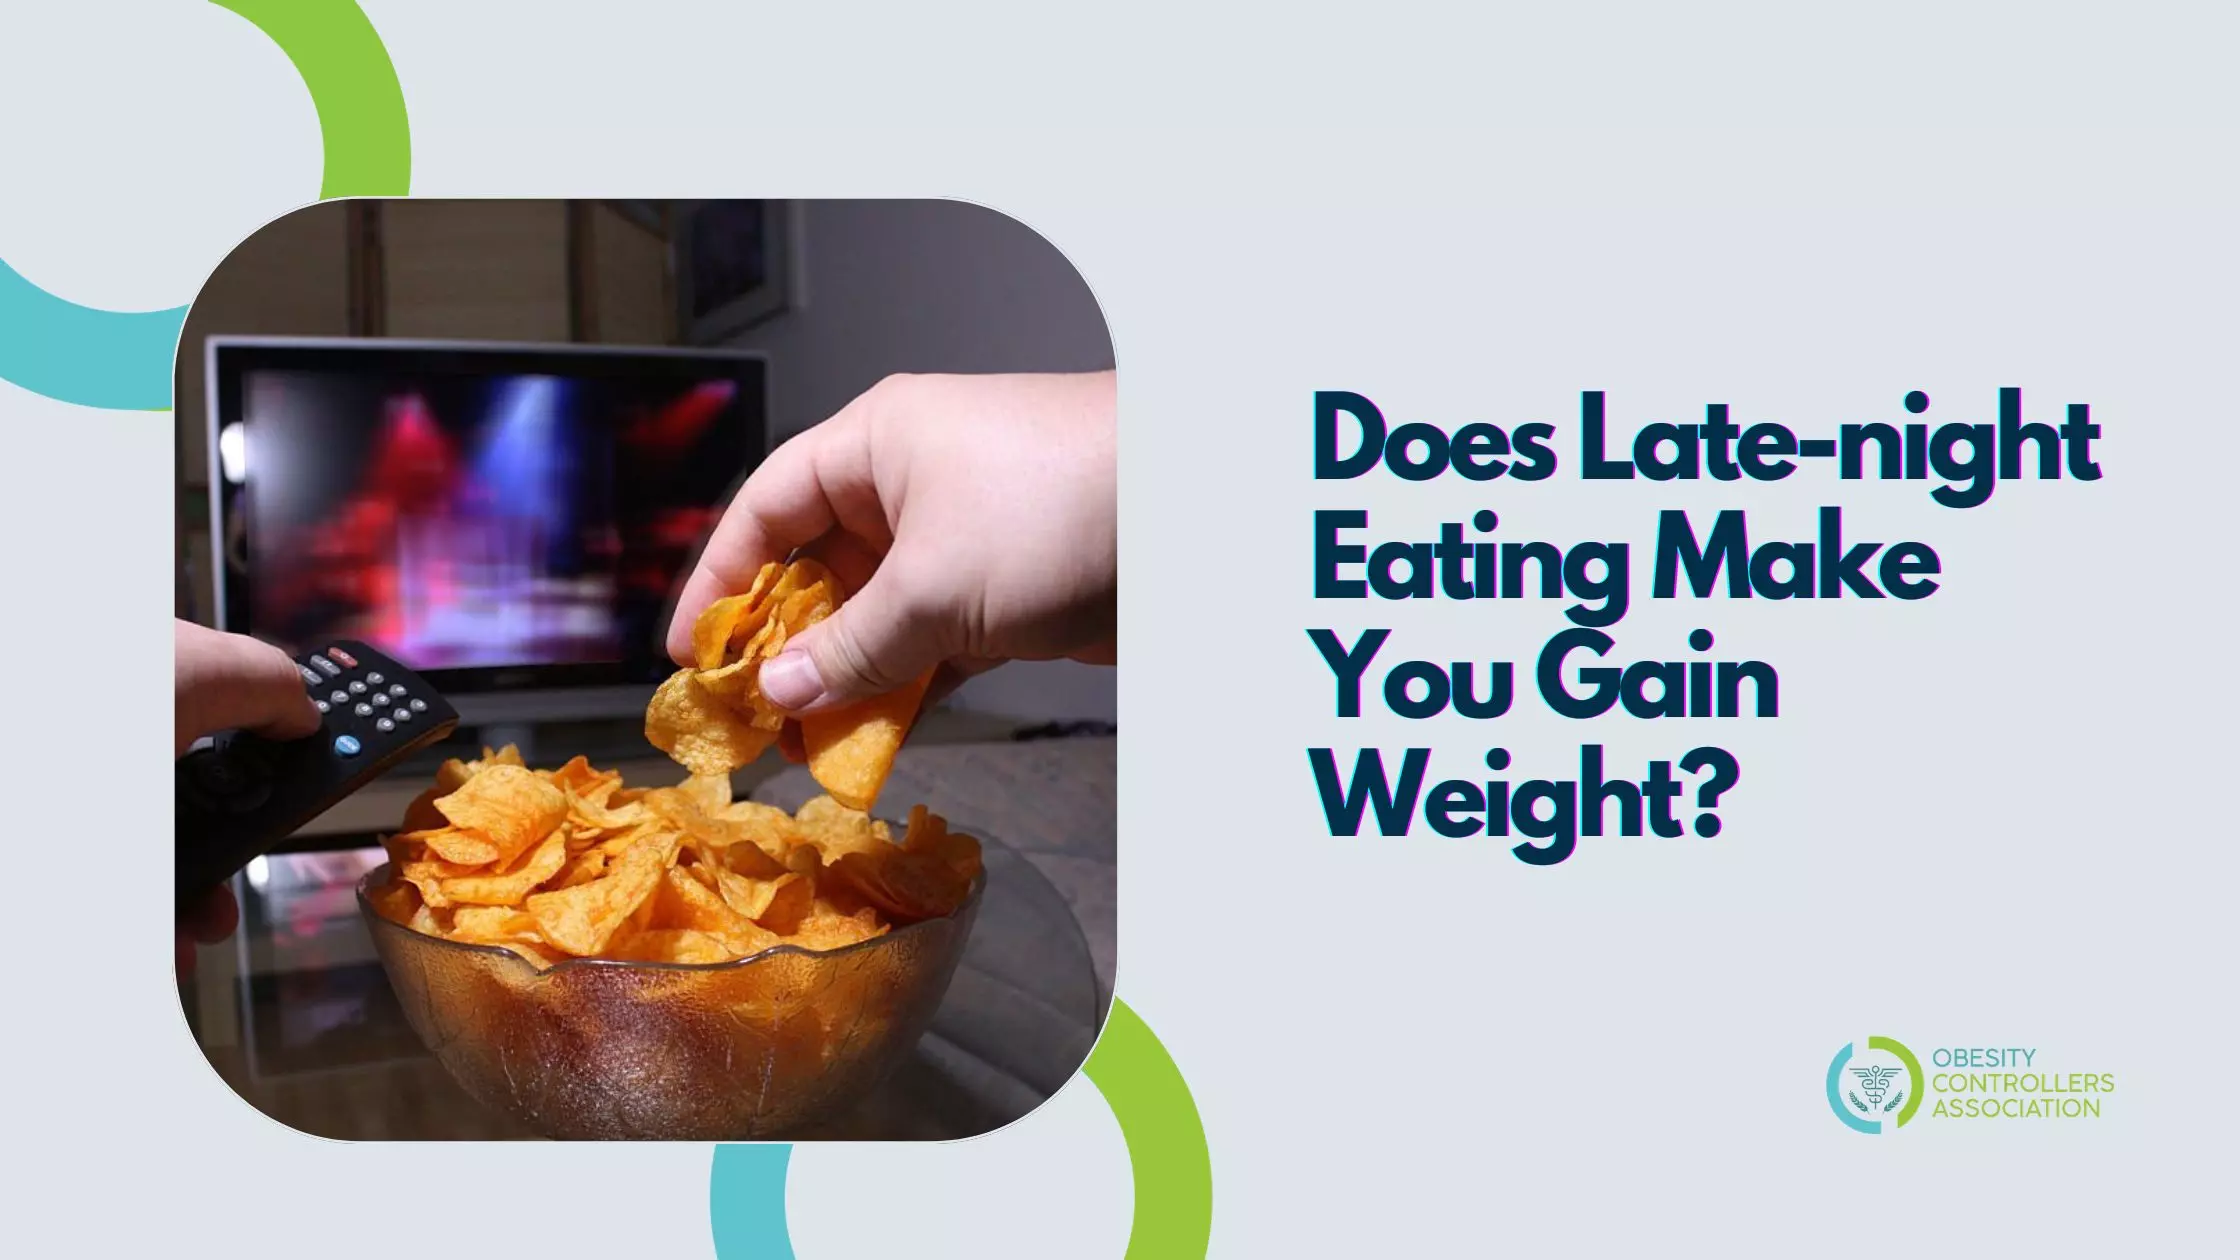 Does Late-night Eating Make You Gain Weight